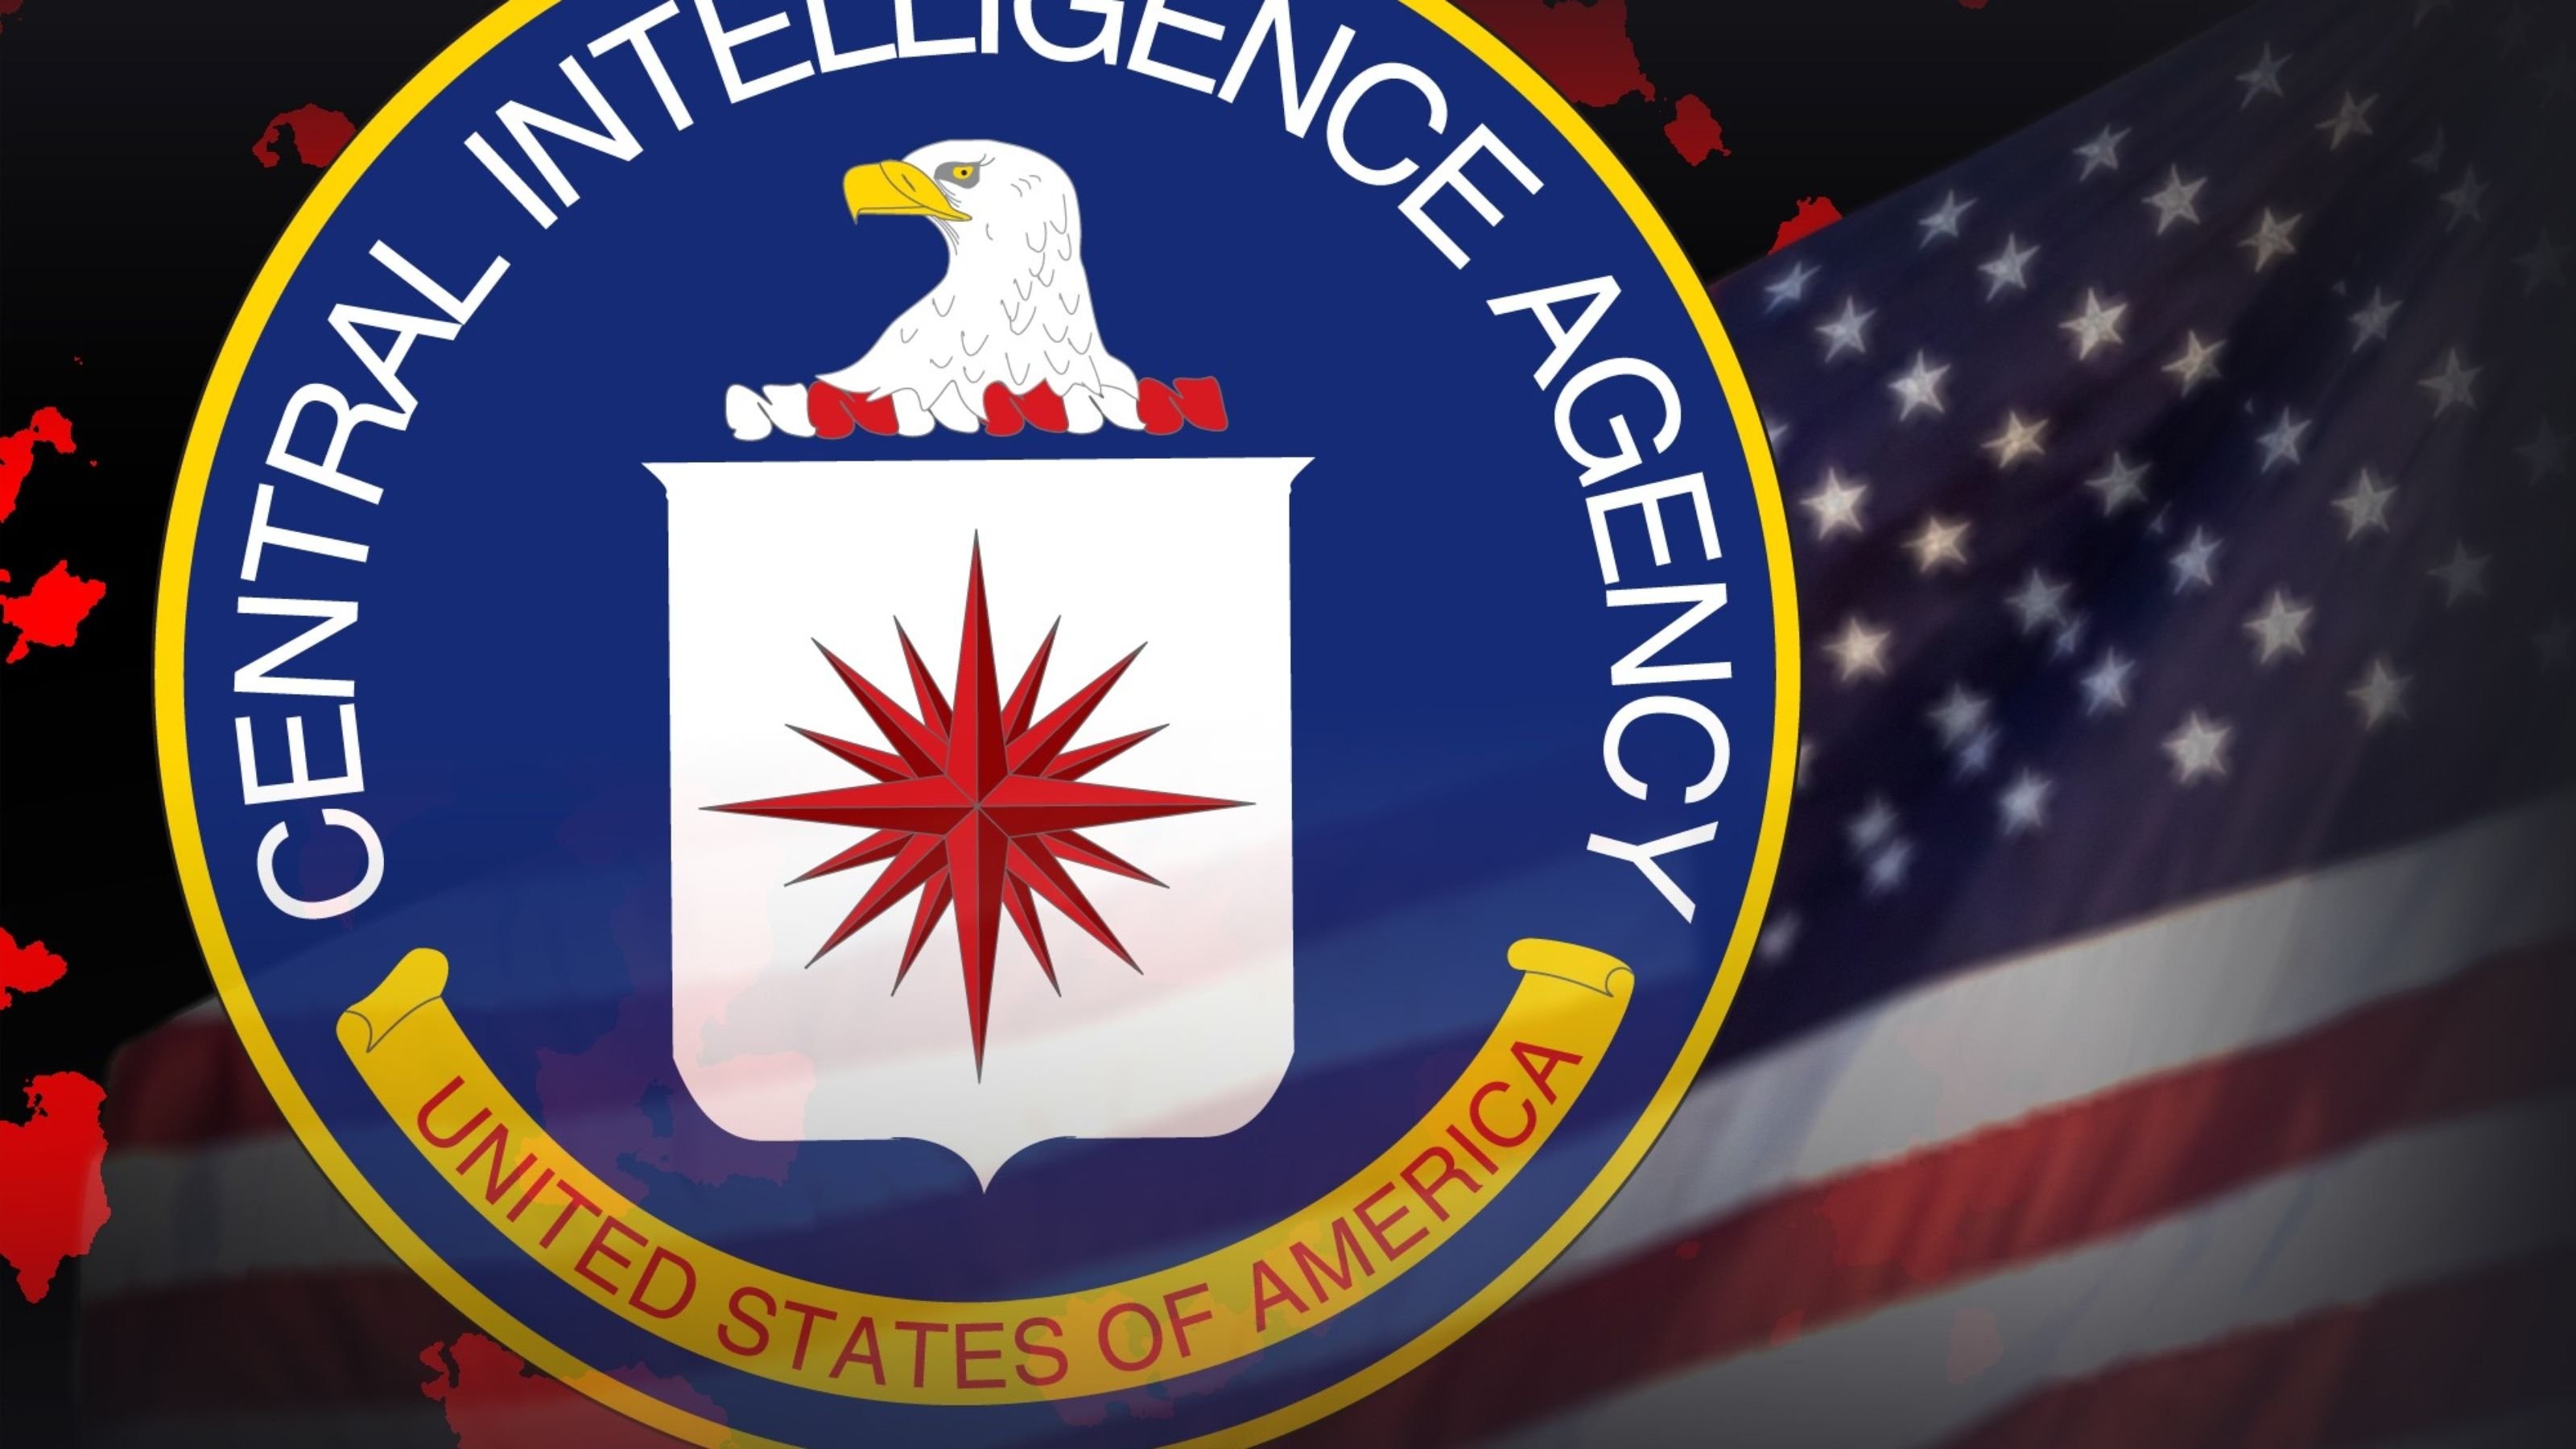 Central Intelligence Agency Wallpaper 61 Images